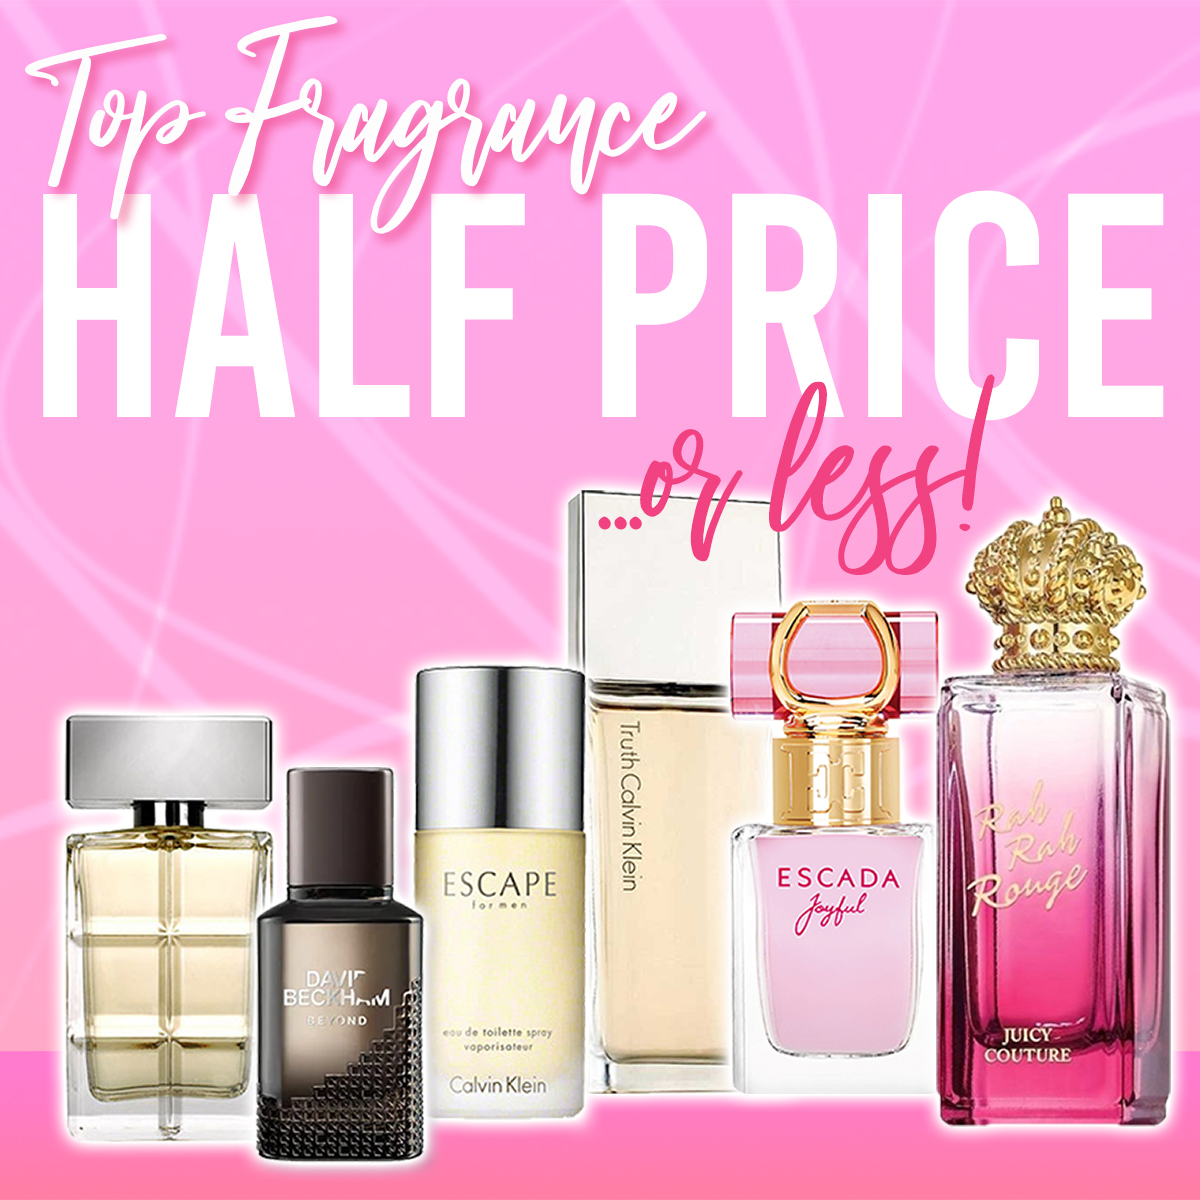 Perfume Plus Direct – The Home Of Cheap Perfume Online